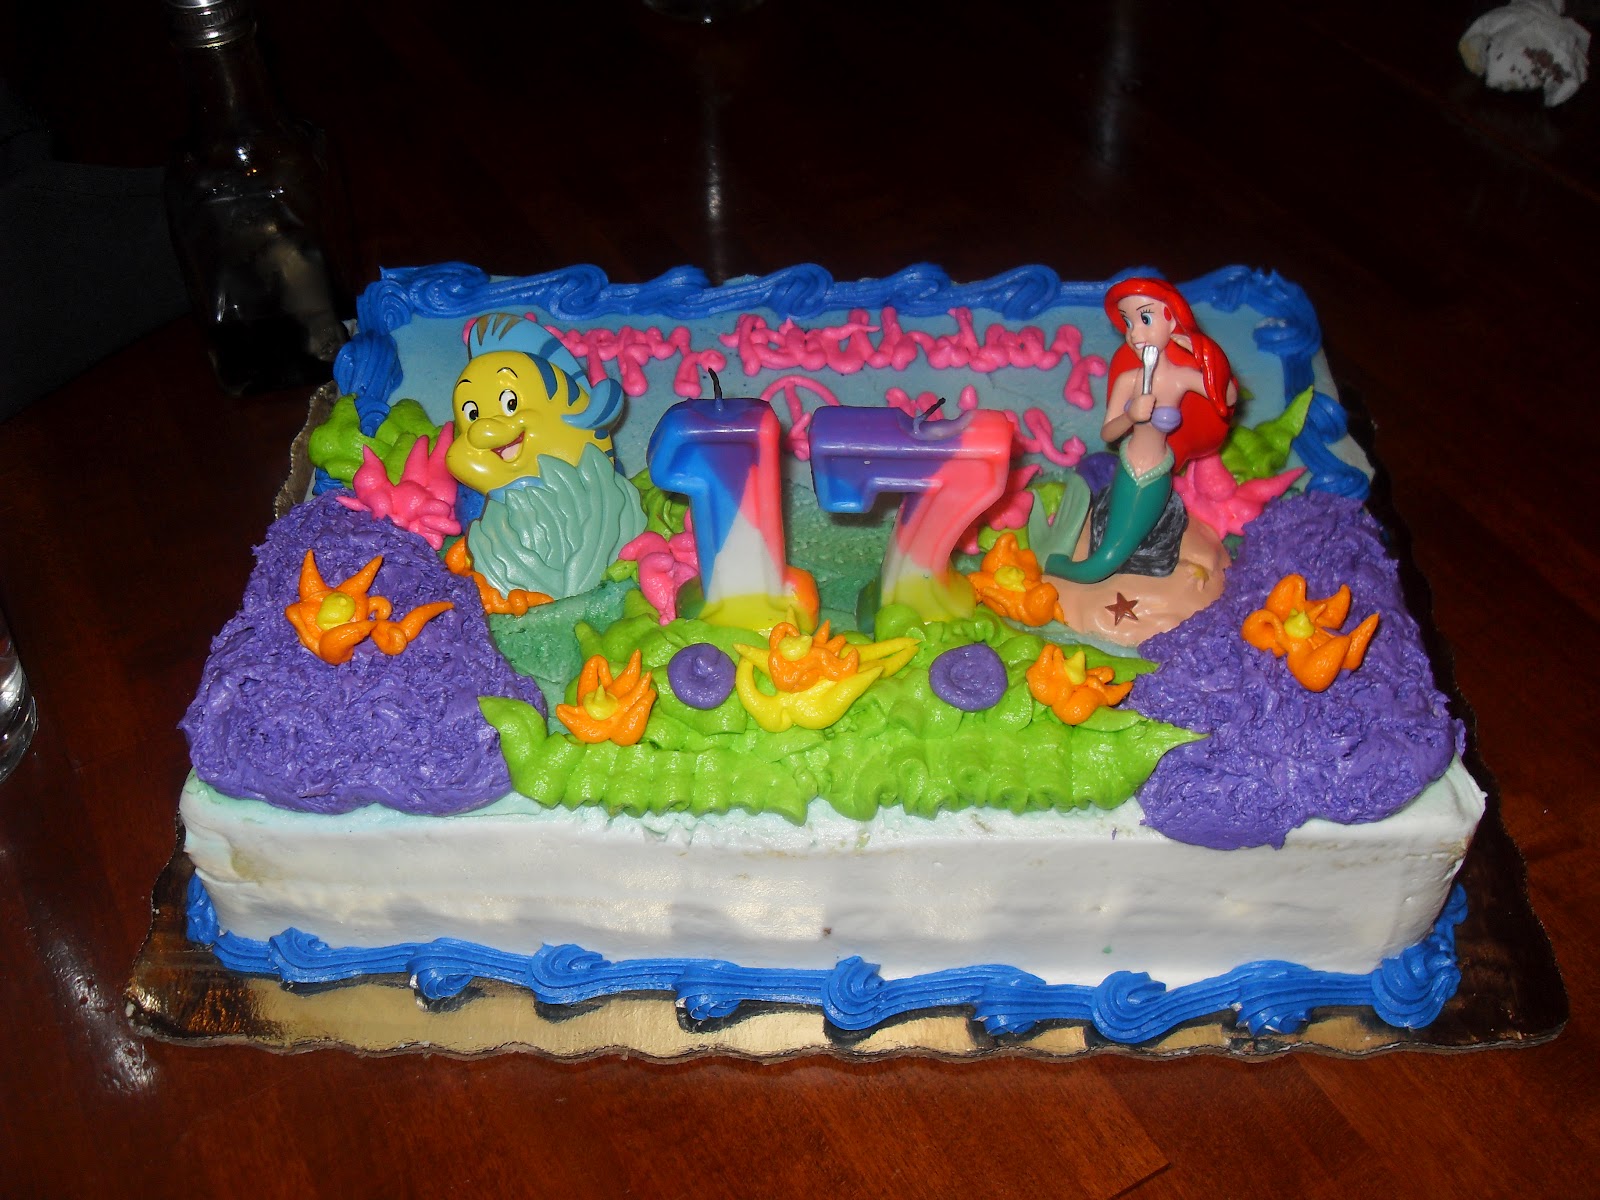 10-cakes-for-17-year-olds-photo-17-year-old-birthday-cake-ideas-17